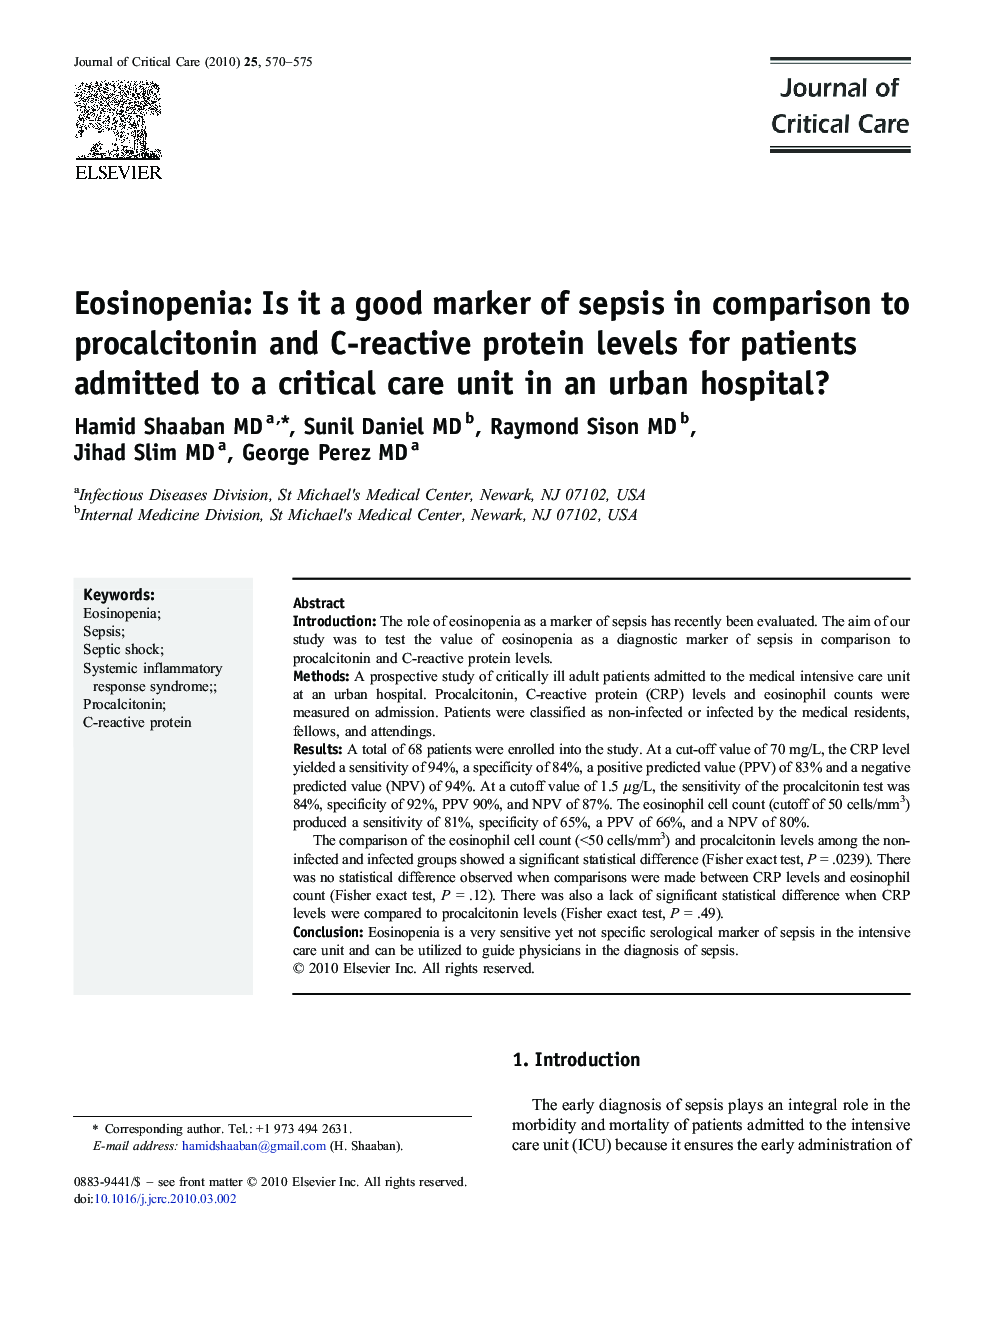 Eosinopenia: Is it a good marker of sepsis in comparison to procalcitonin and C-reactive protein levels for patients admitted to a critical care unit in an urban hospital?